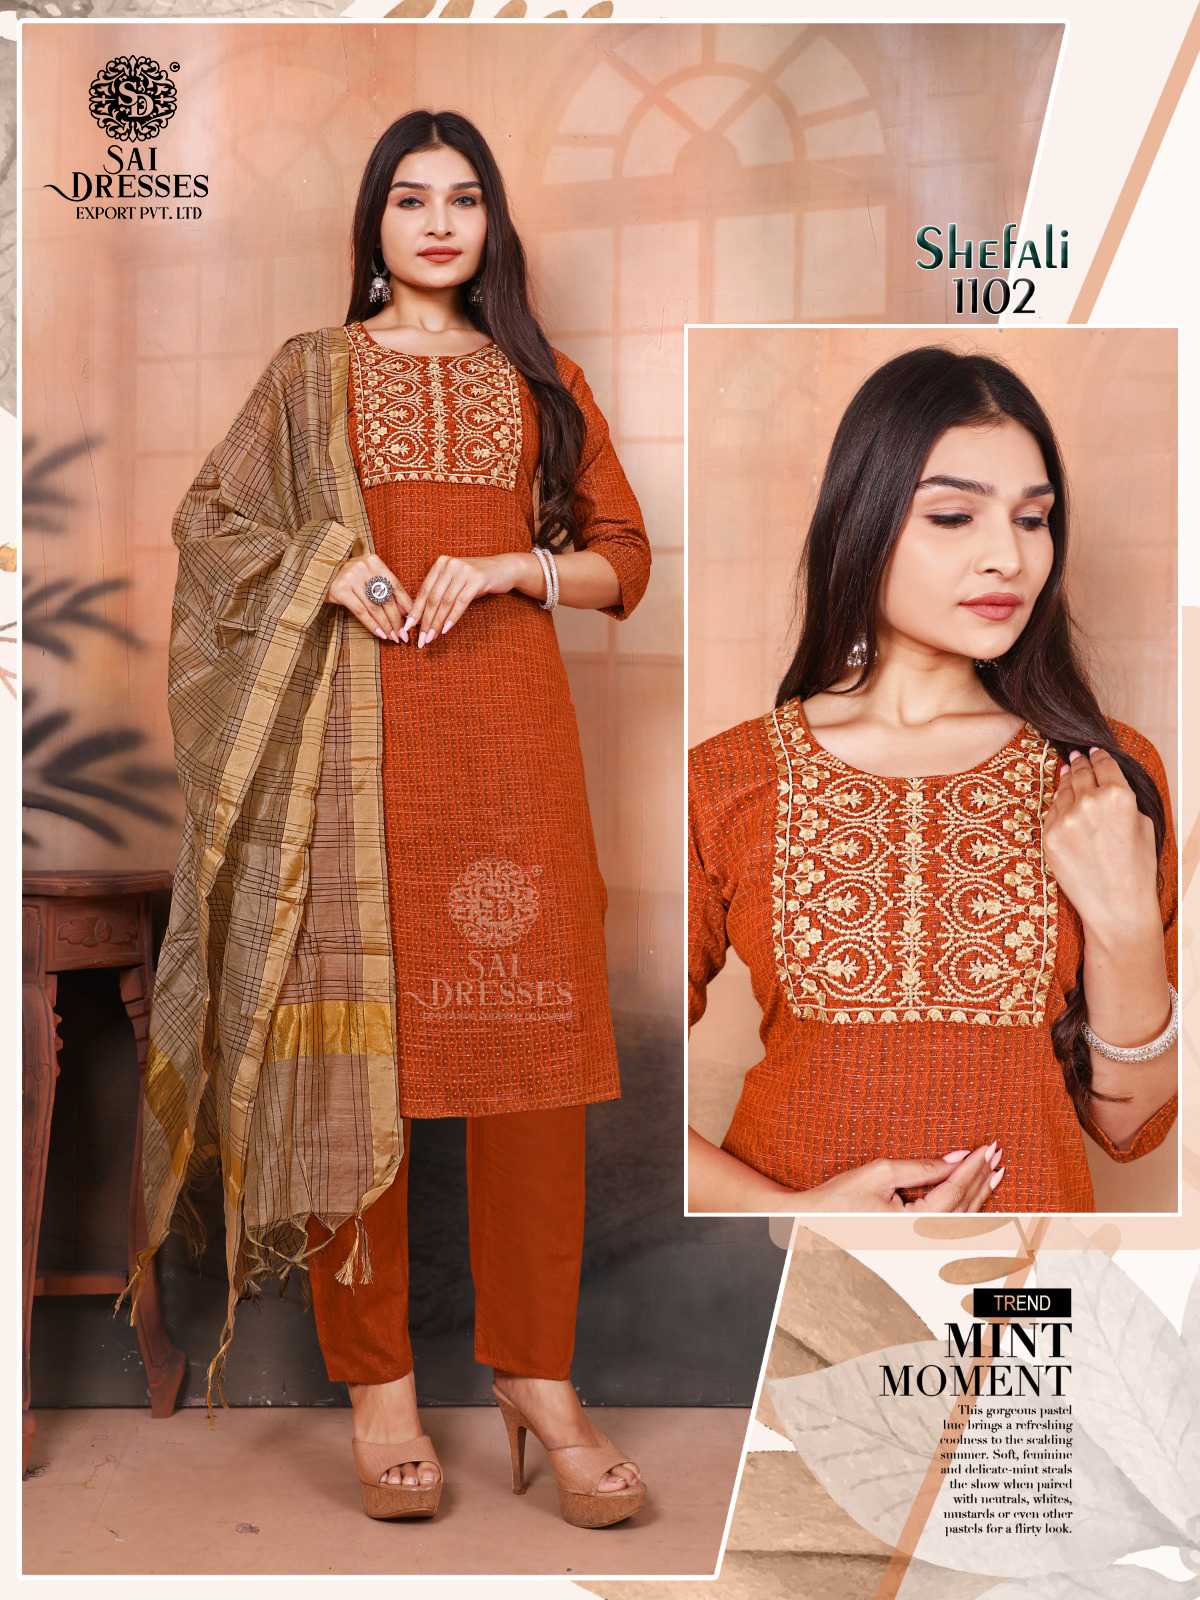 SAI DRESSES PRESENT SHEFALI READY TO DAILY WEAR PANT STYLE 3 PIECE CONCEPT IN WHOLESALE RATE IN SURAT